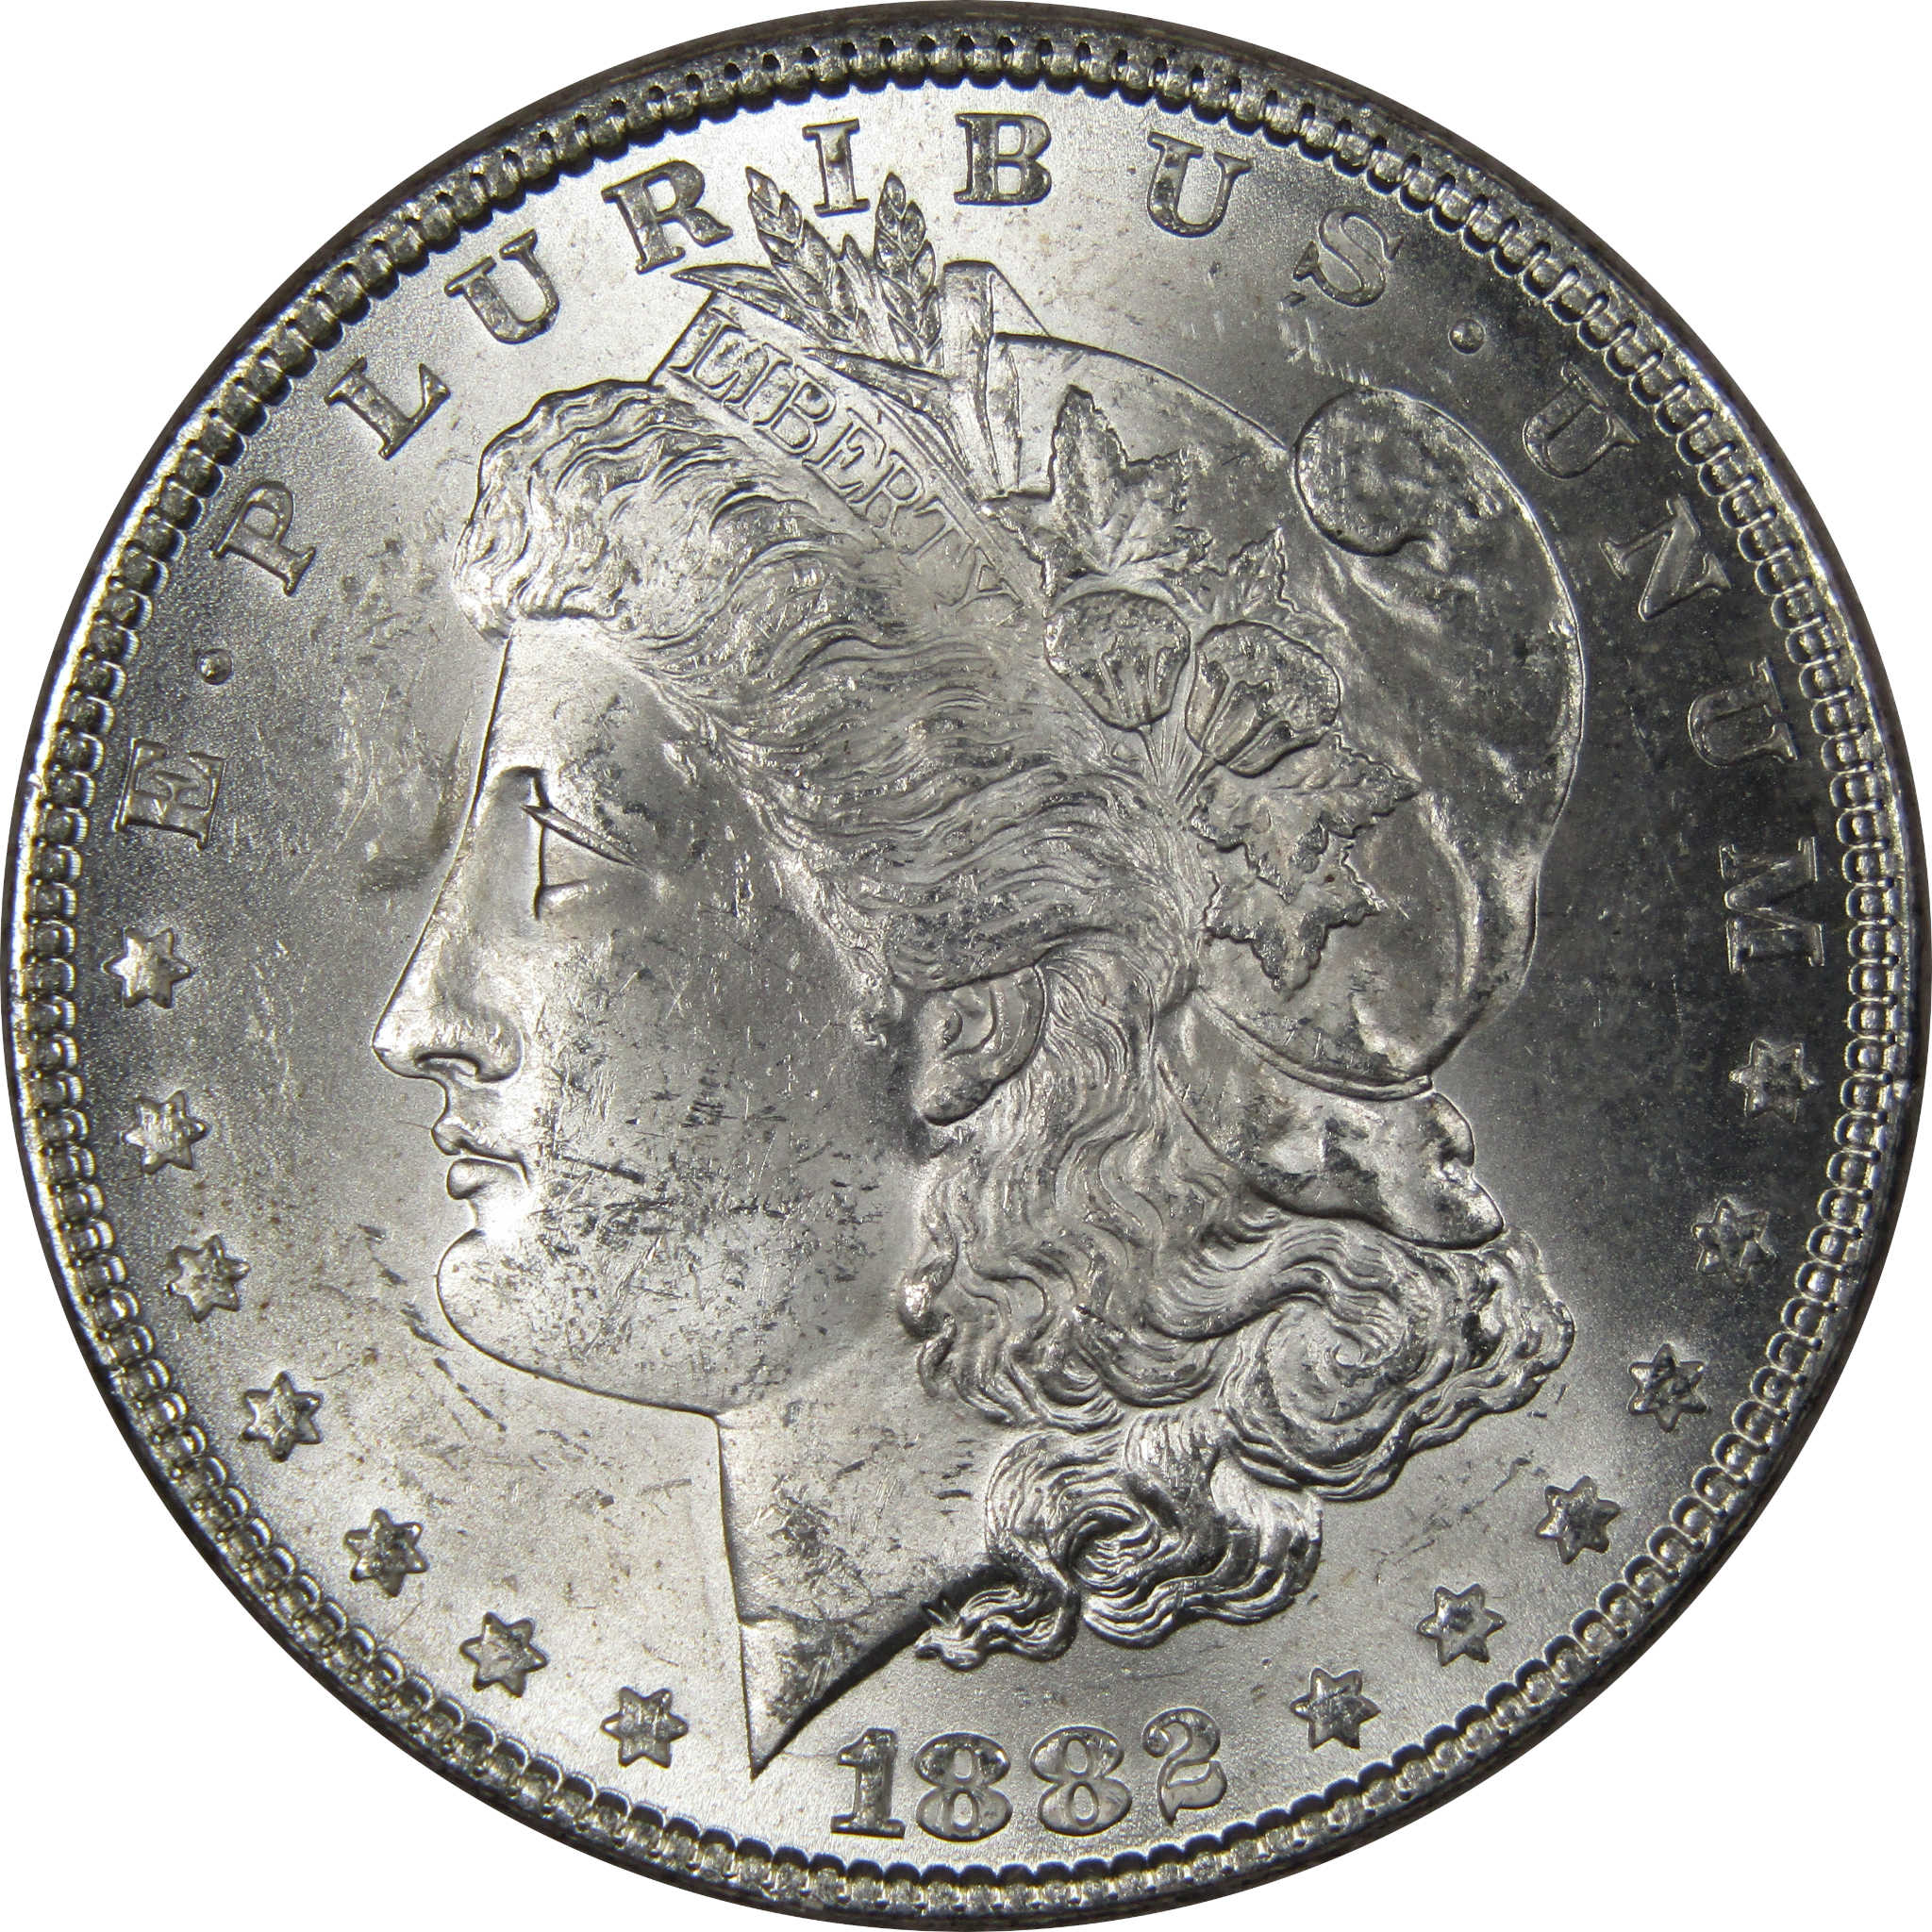 1882 Morgan Dollar BU Uncirculated Mint State 90% Silver SKU:IPC9693 - Morgan coin - Morgan silver dollar - Morgan silver dollar for sale - Profile Coins &amp; Collectibles